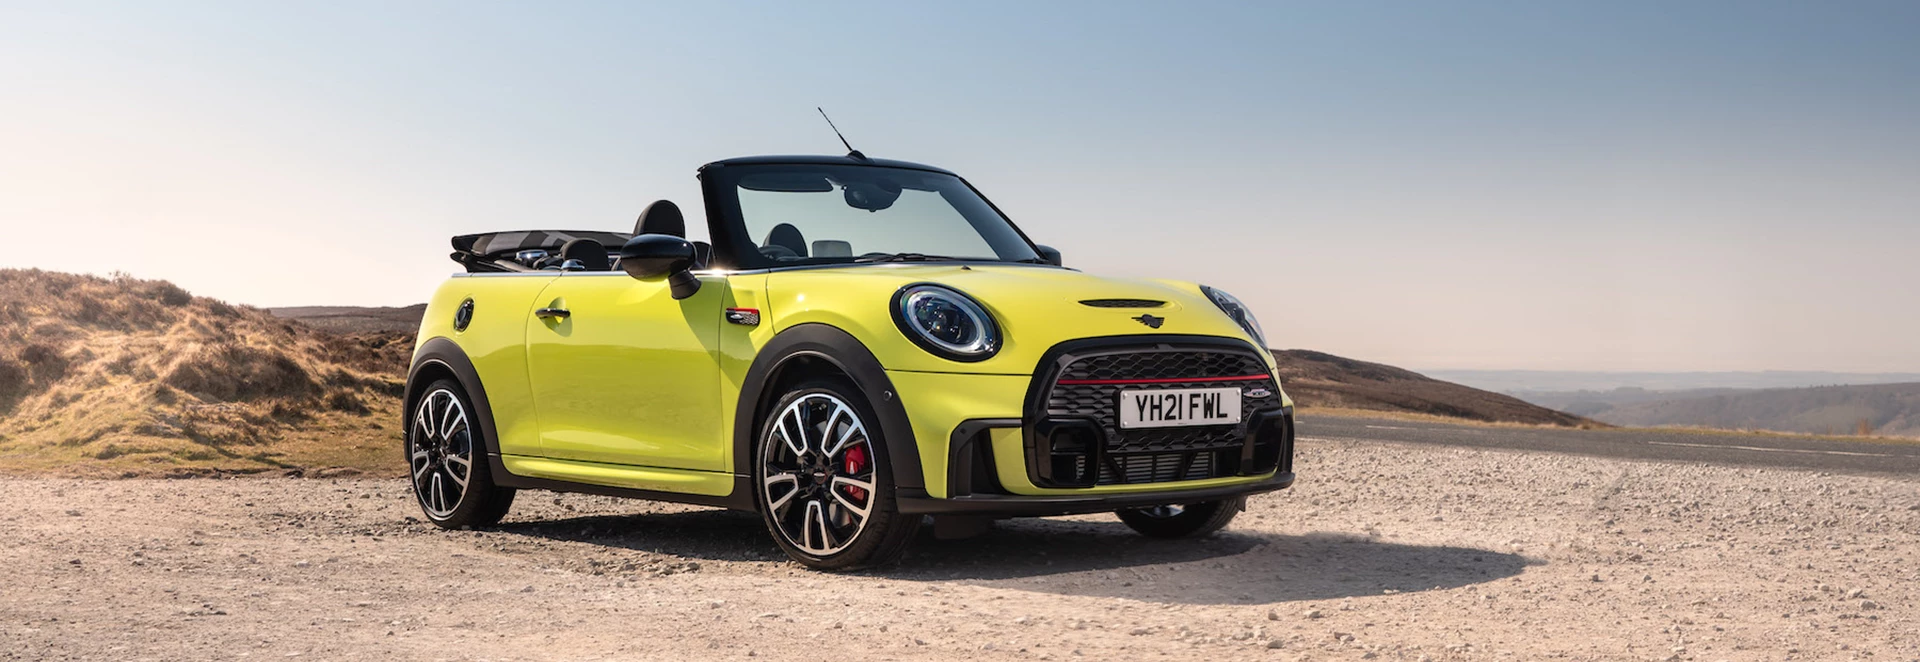 New electric Mini Convertible confirmed to be on the way 